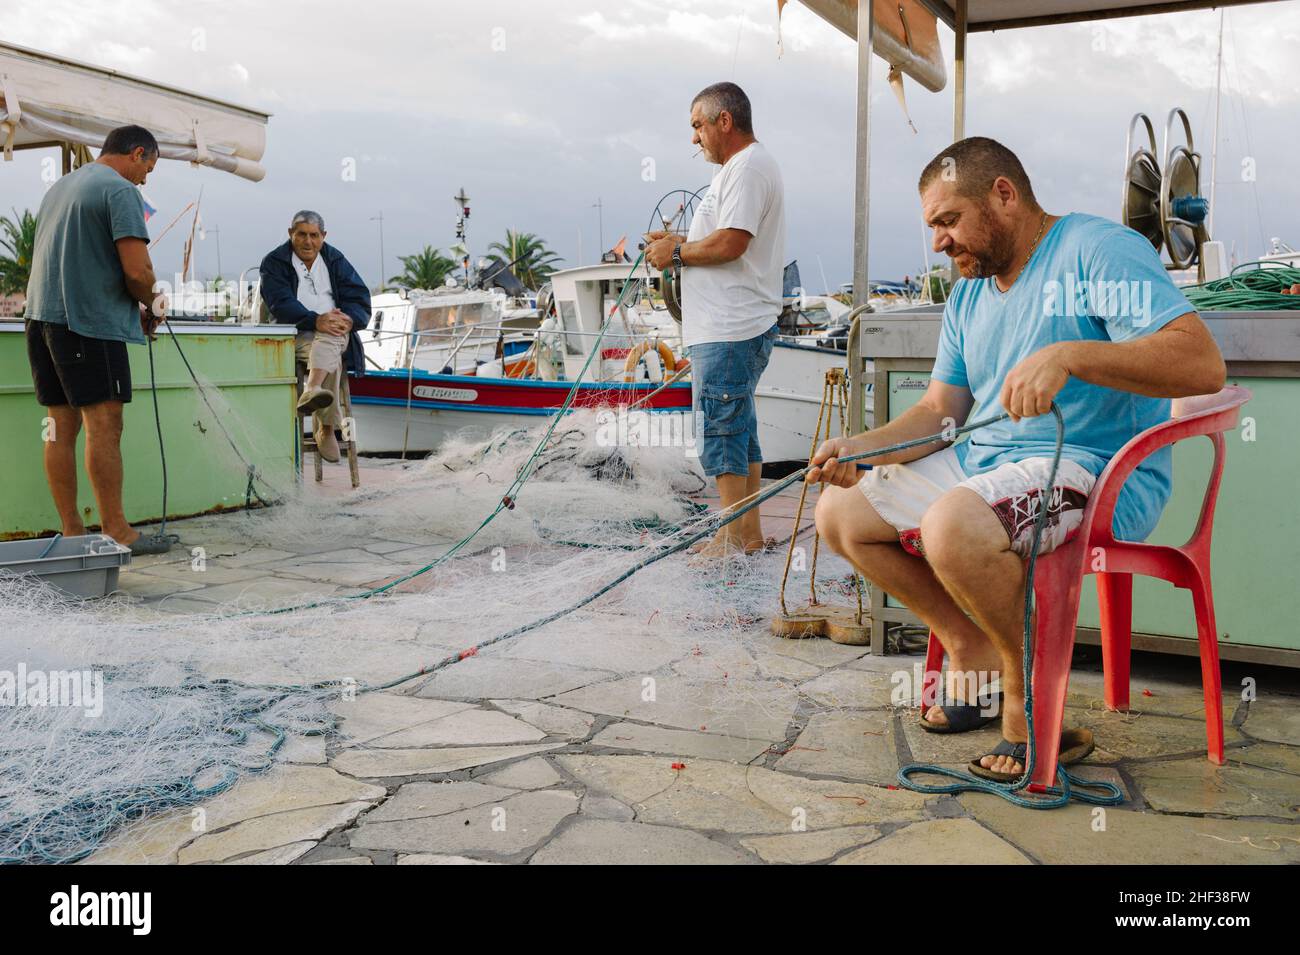 Fisherman mending their nets after a fishing trip at first light in the small French fishing port of Sanary sur Mer, Cote d' Azur in the south of France. 2014. Stock Photo